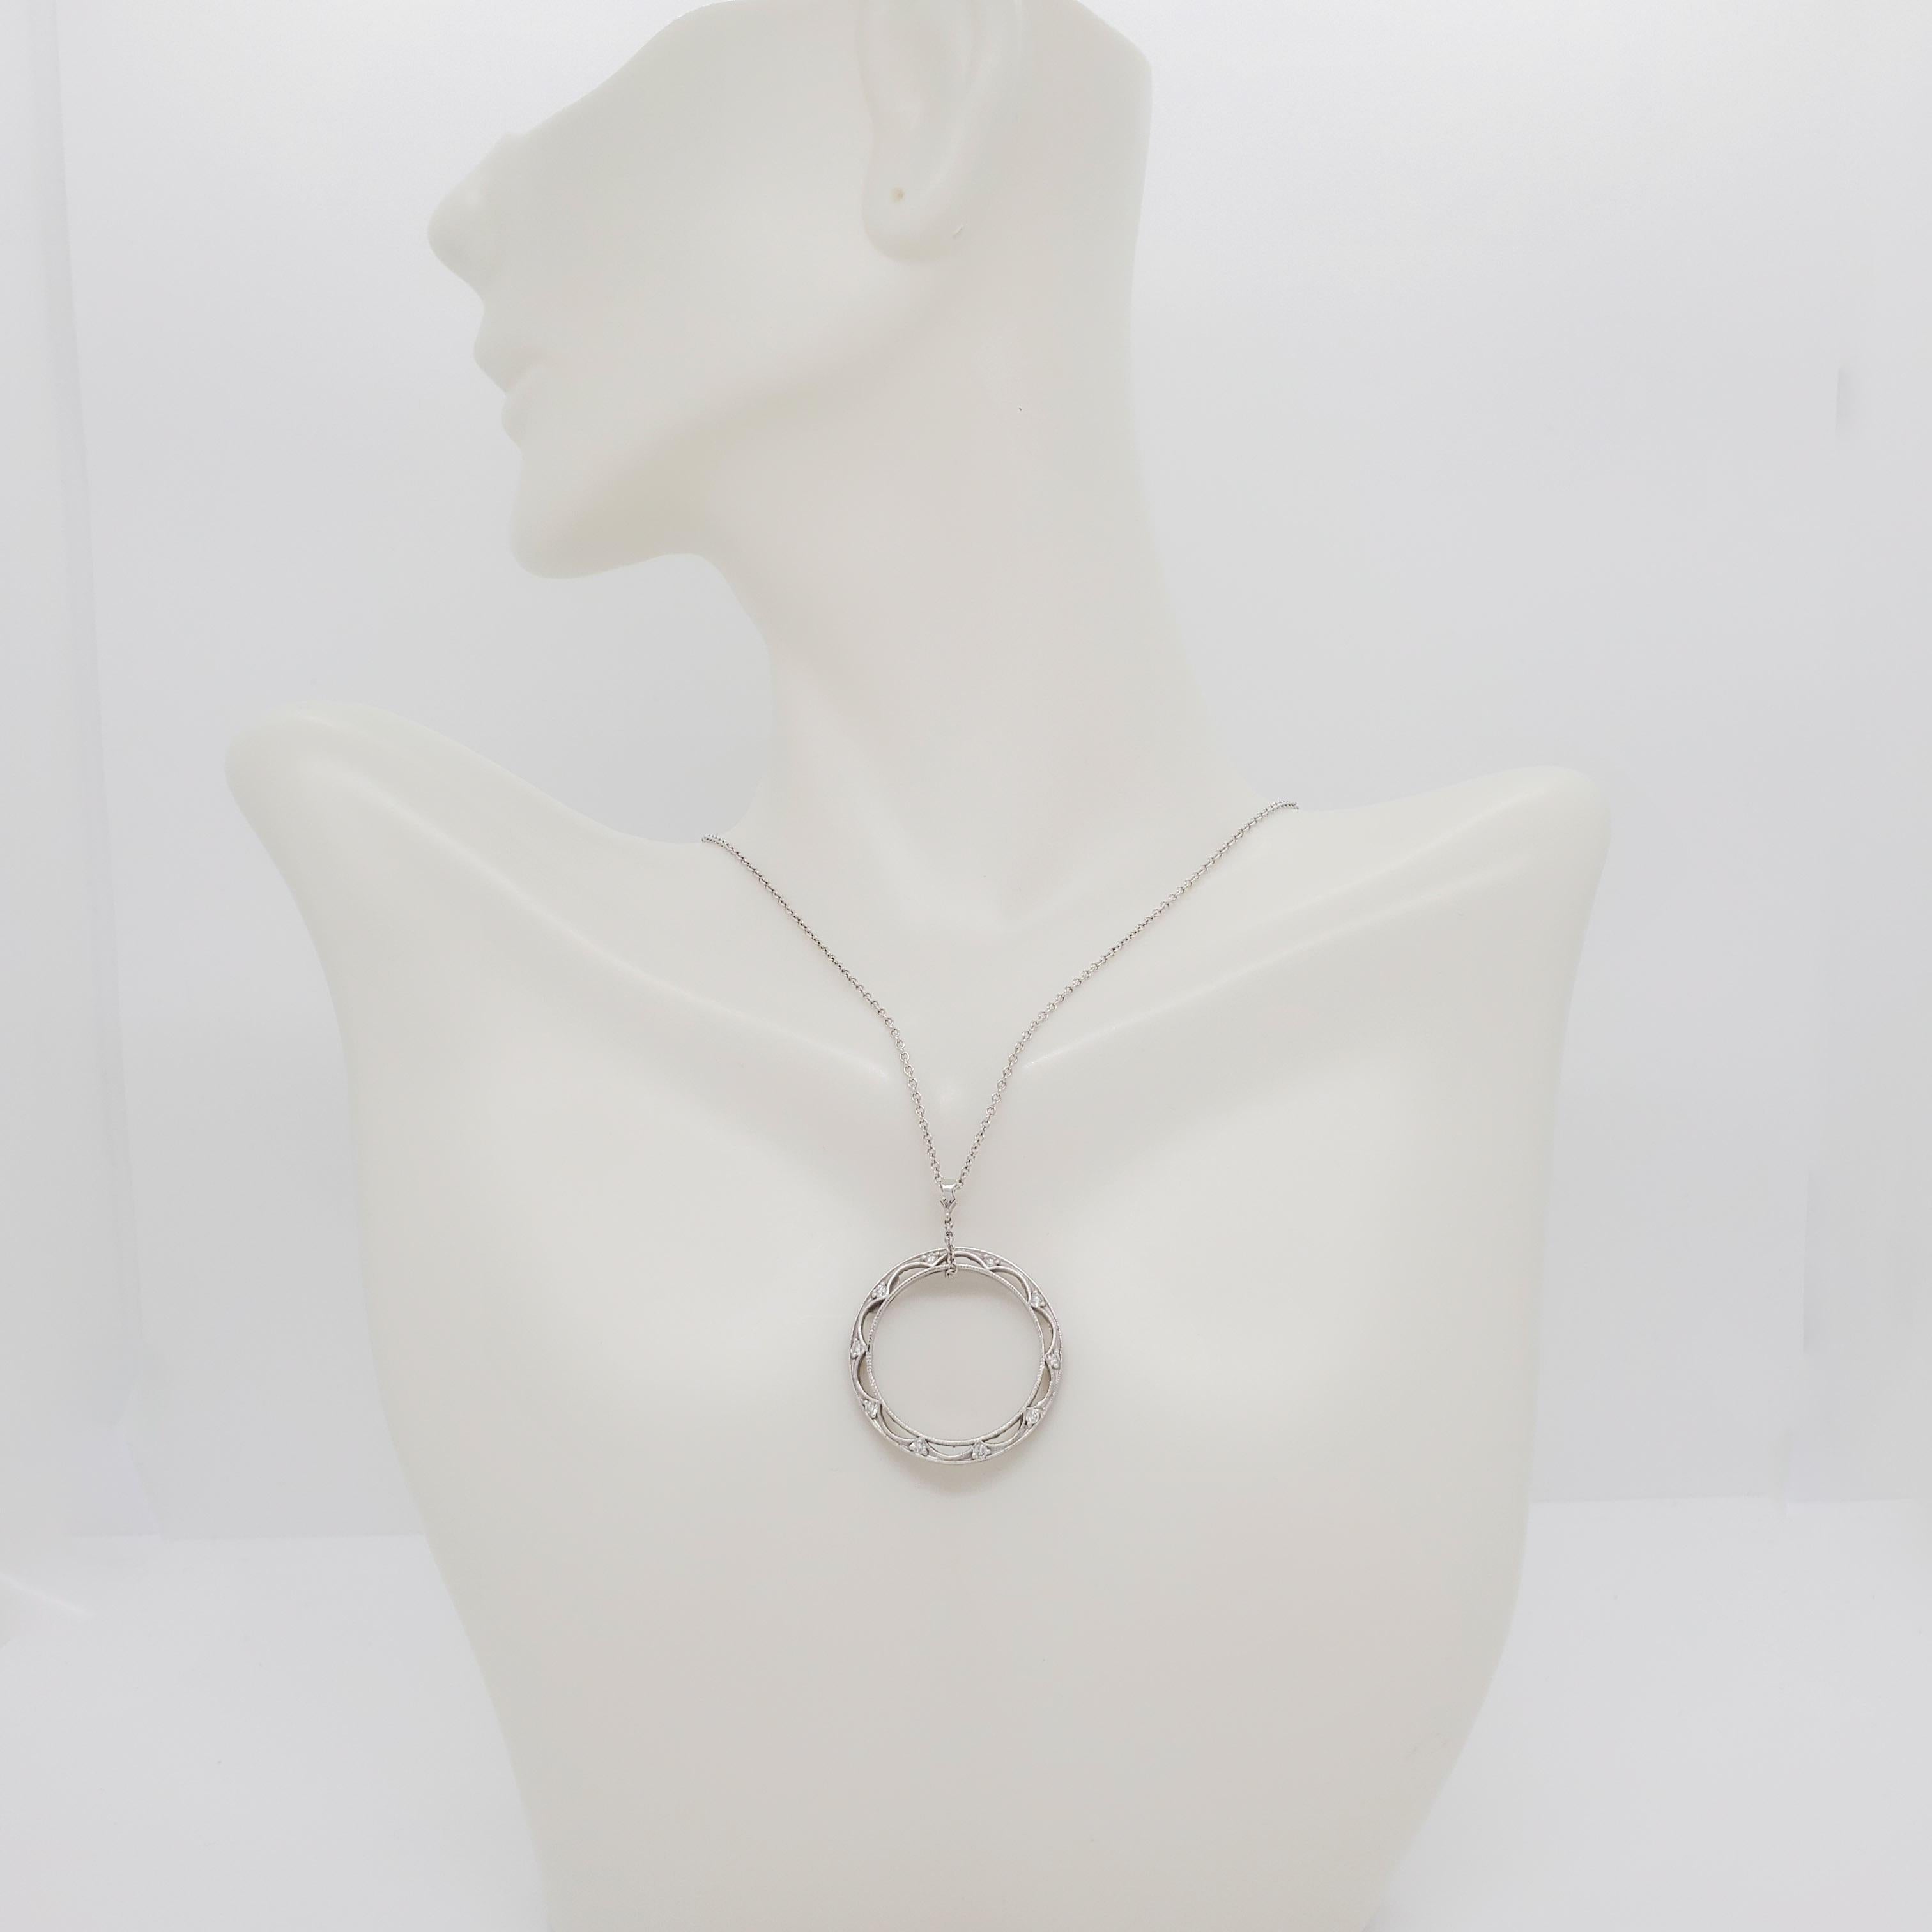 Beautiful necklace featuring 0.18 ct. good quality, white, and bright diamond rounds in a handmade 18k white gold mounting and chain.  Length is 18